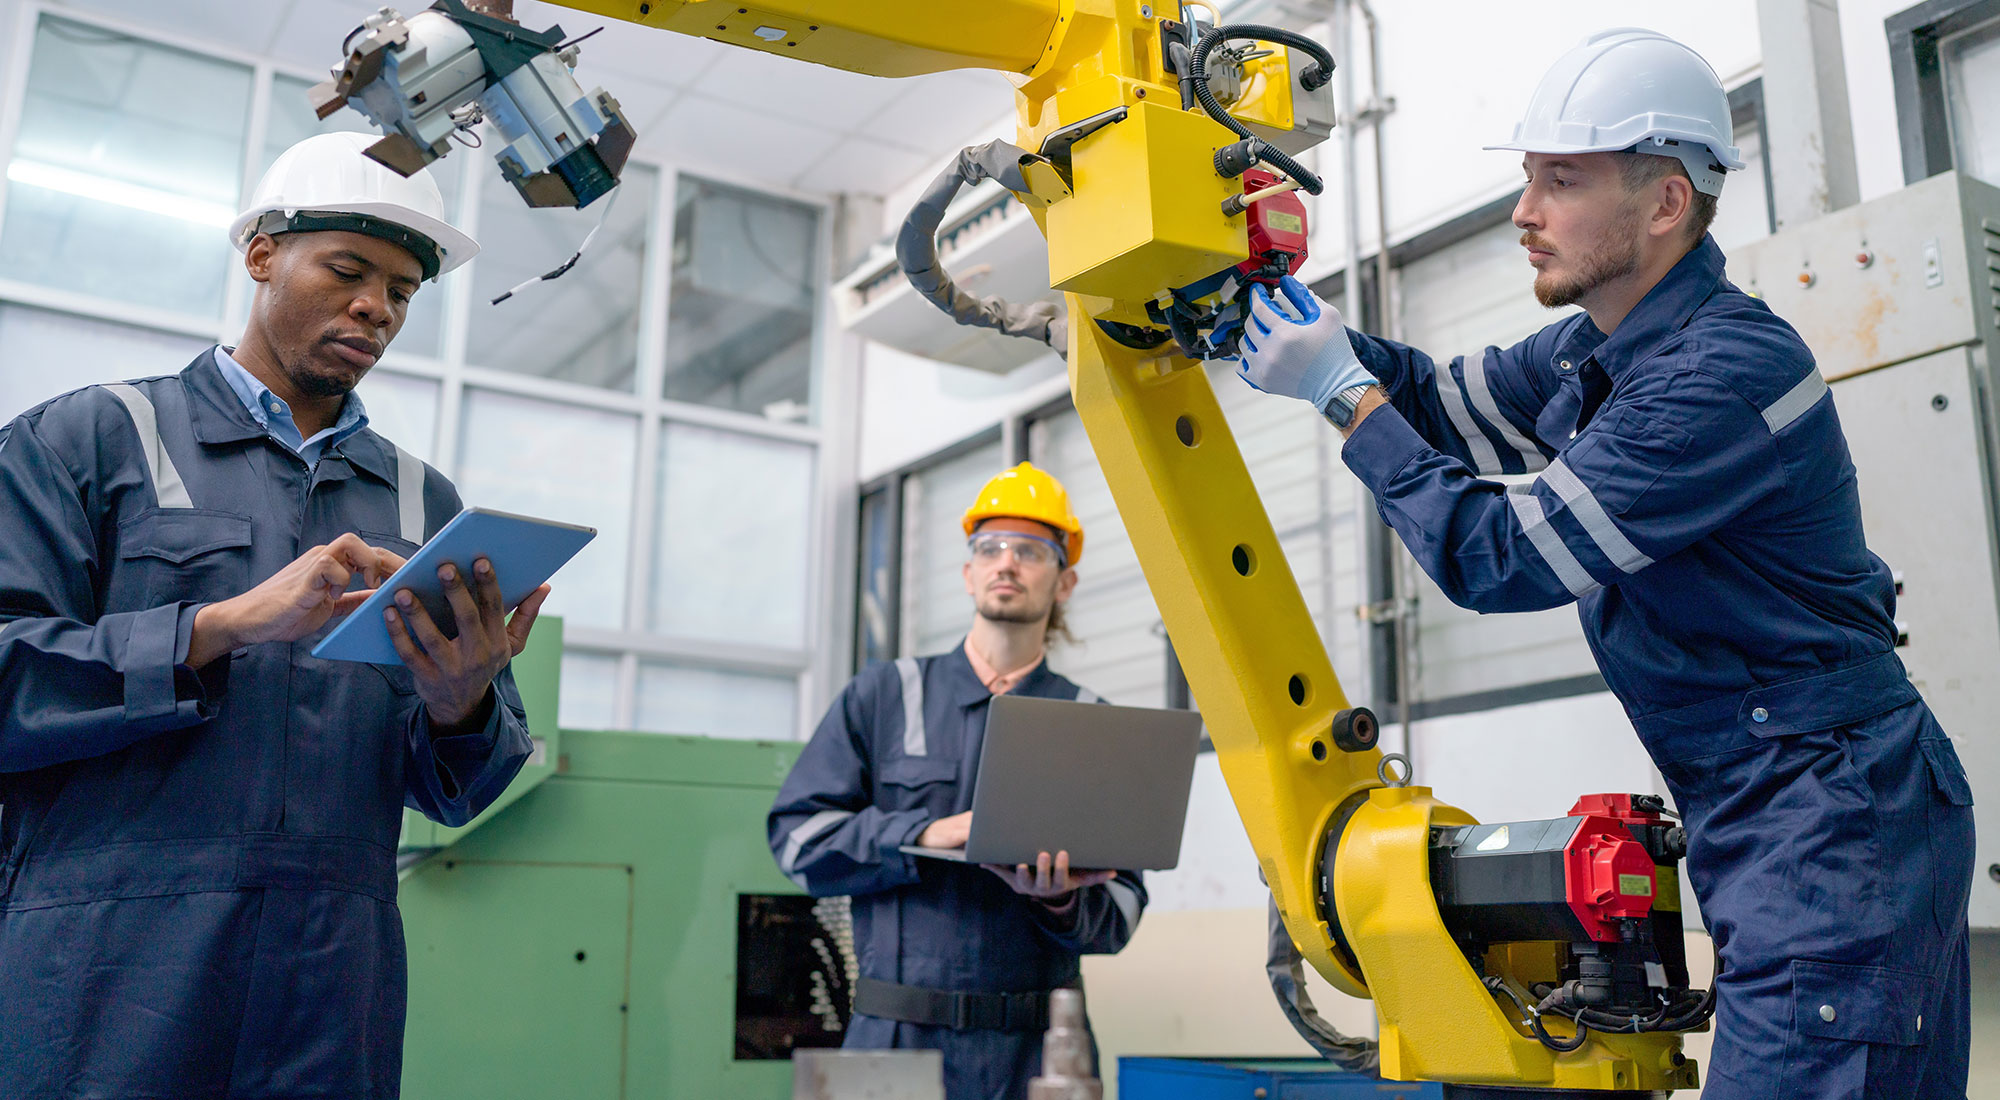 technician-working-with-team-to-check-robotic-arm